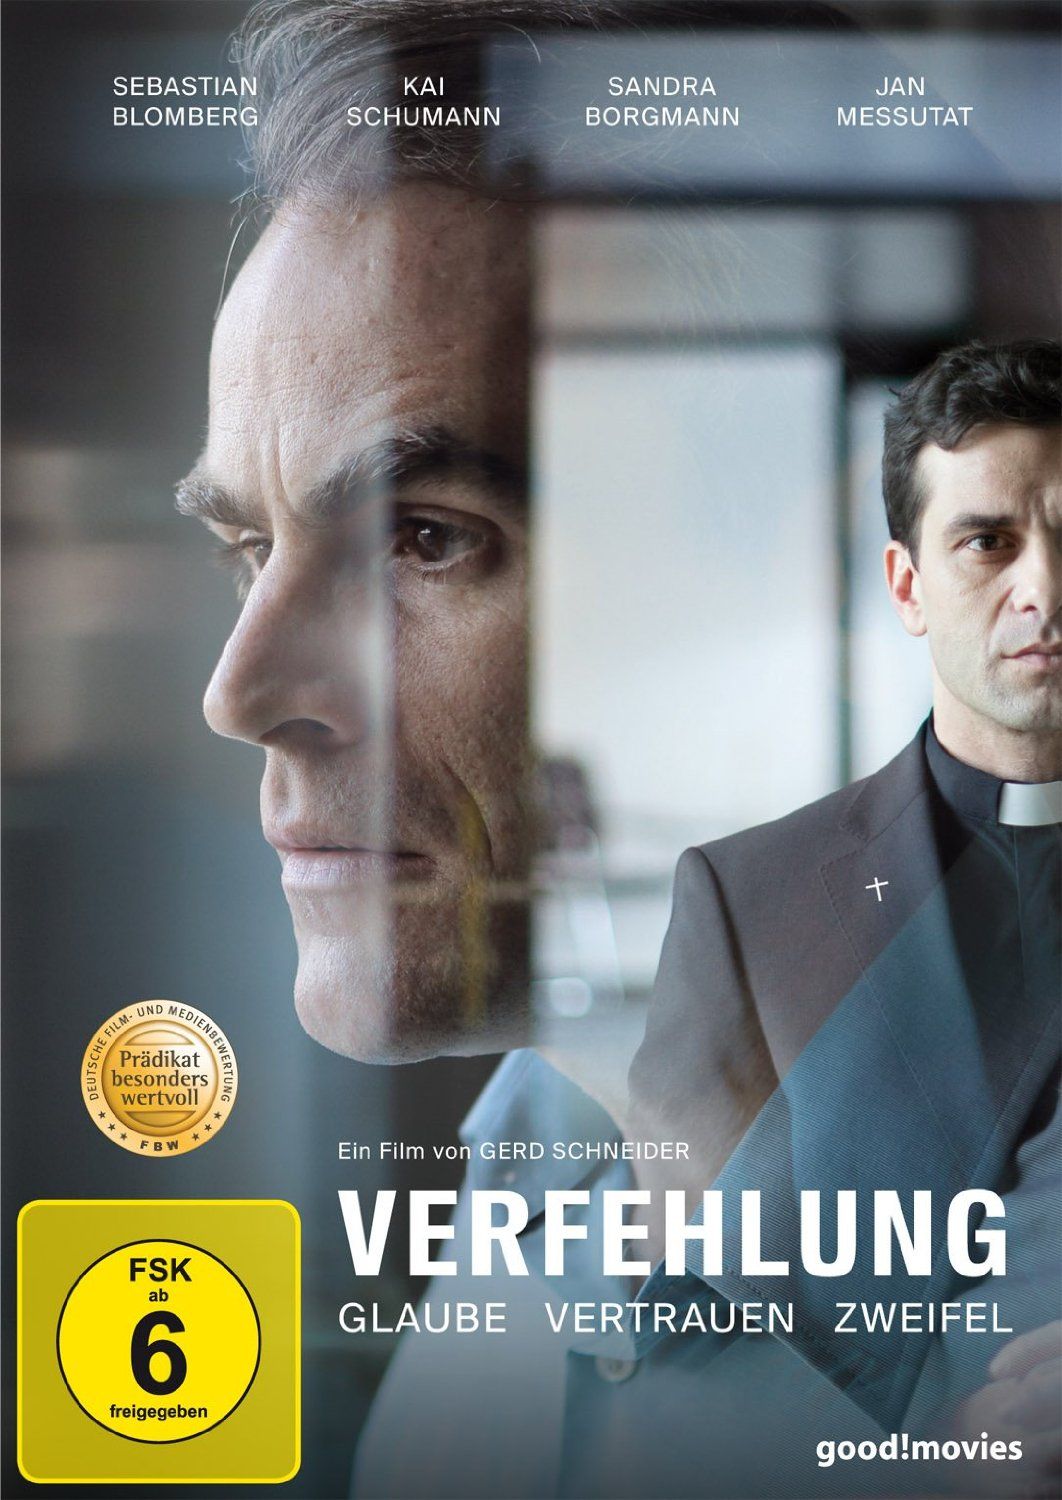 Verfehlung - Film-DVD-Cover (c) KFW